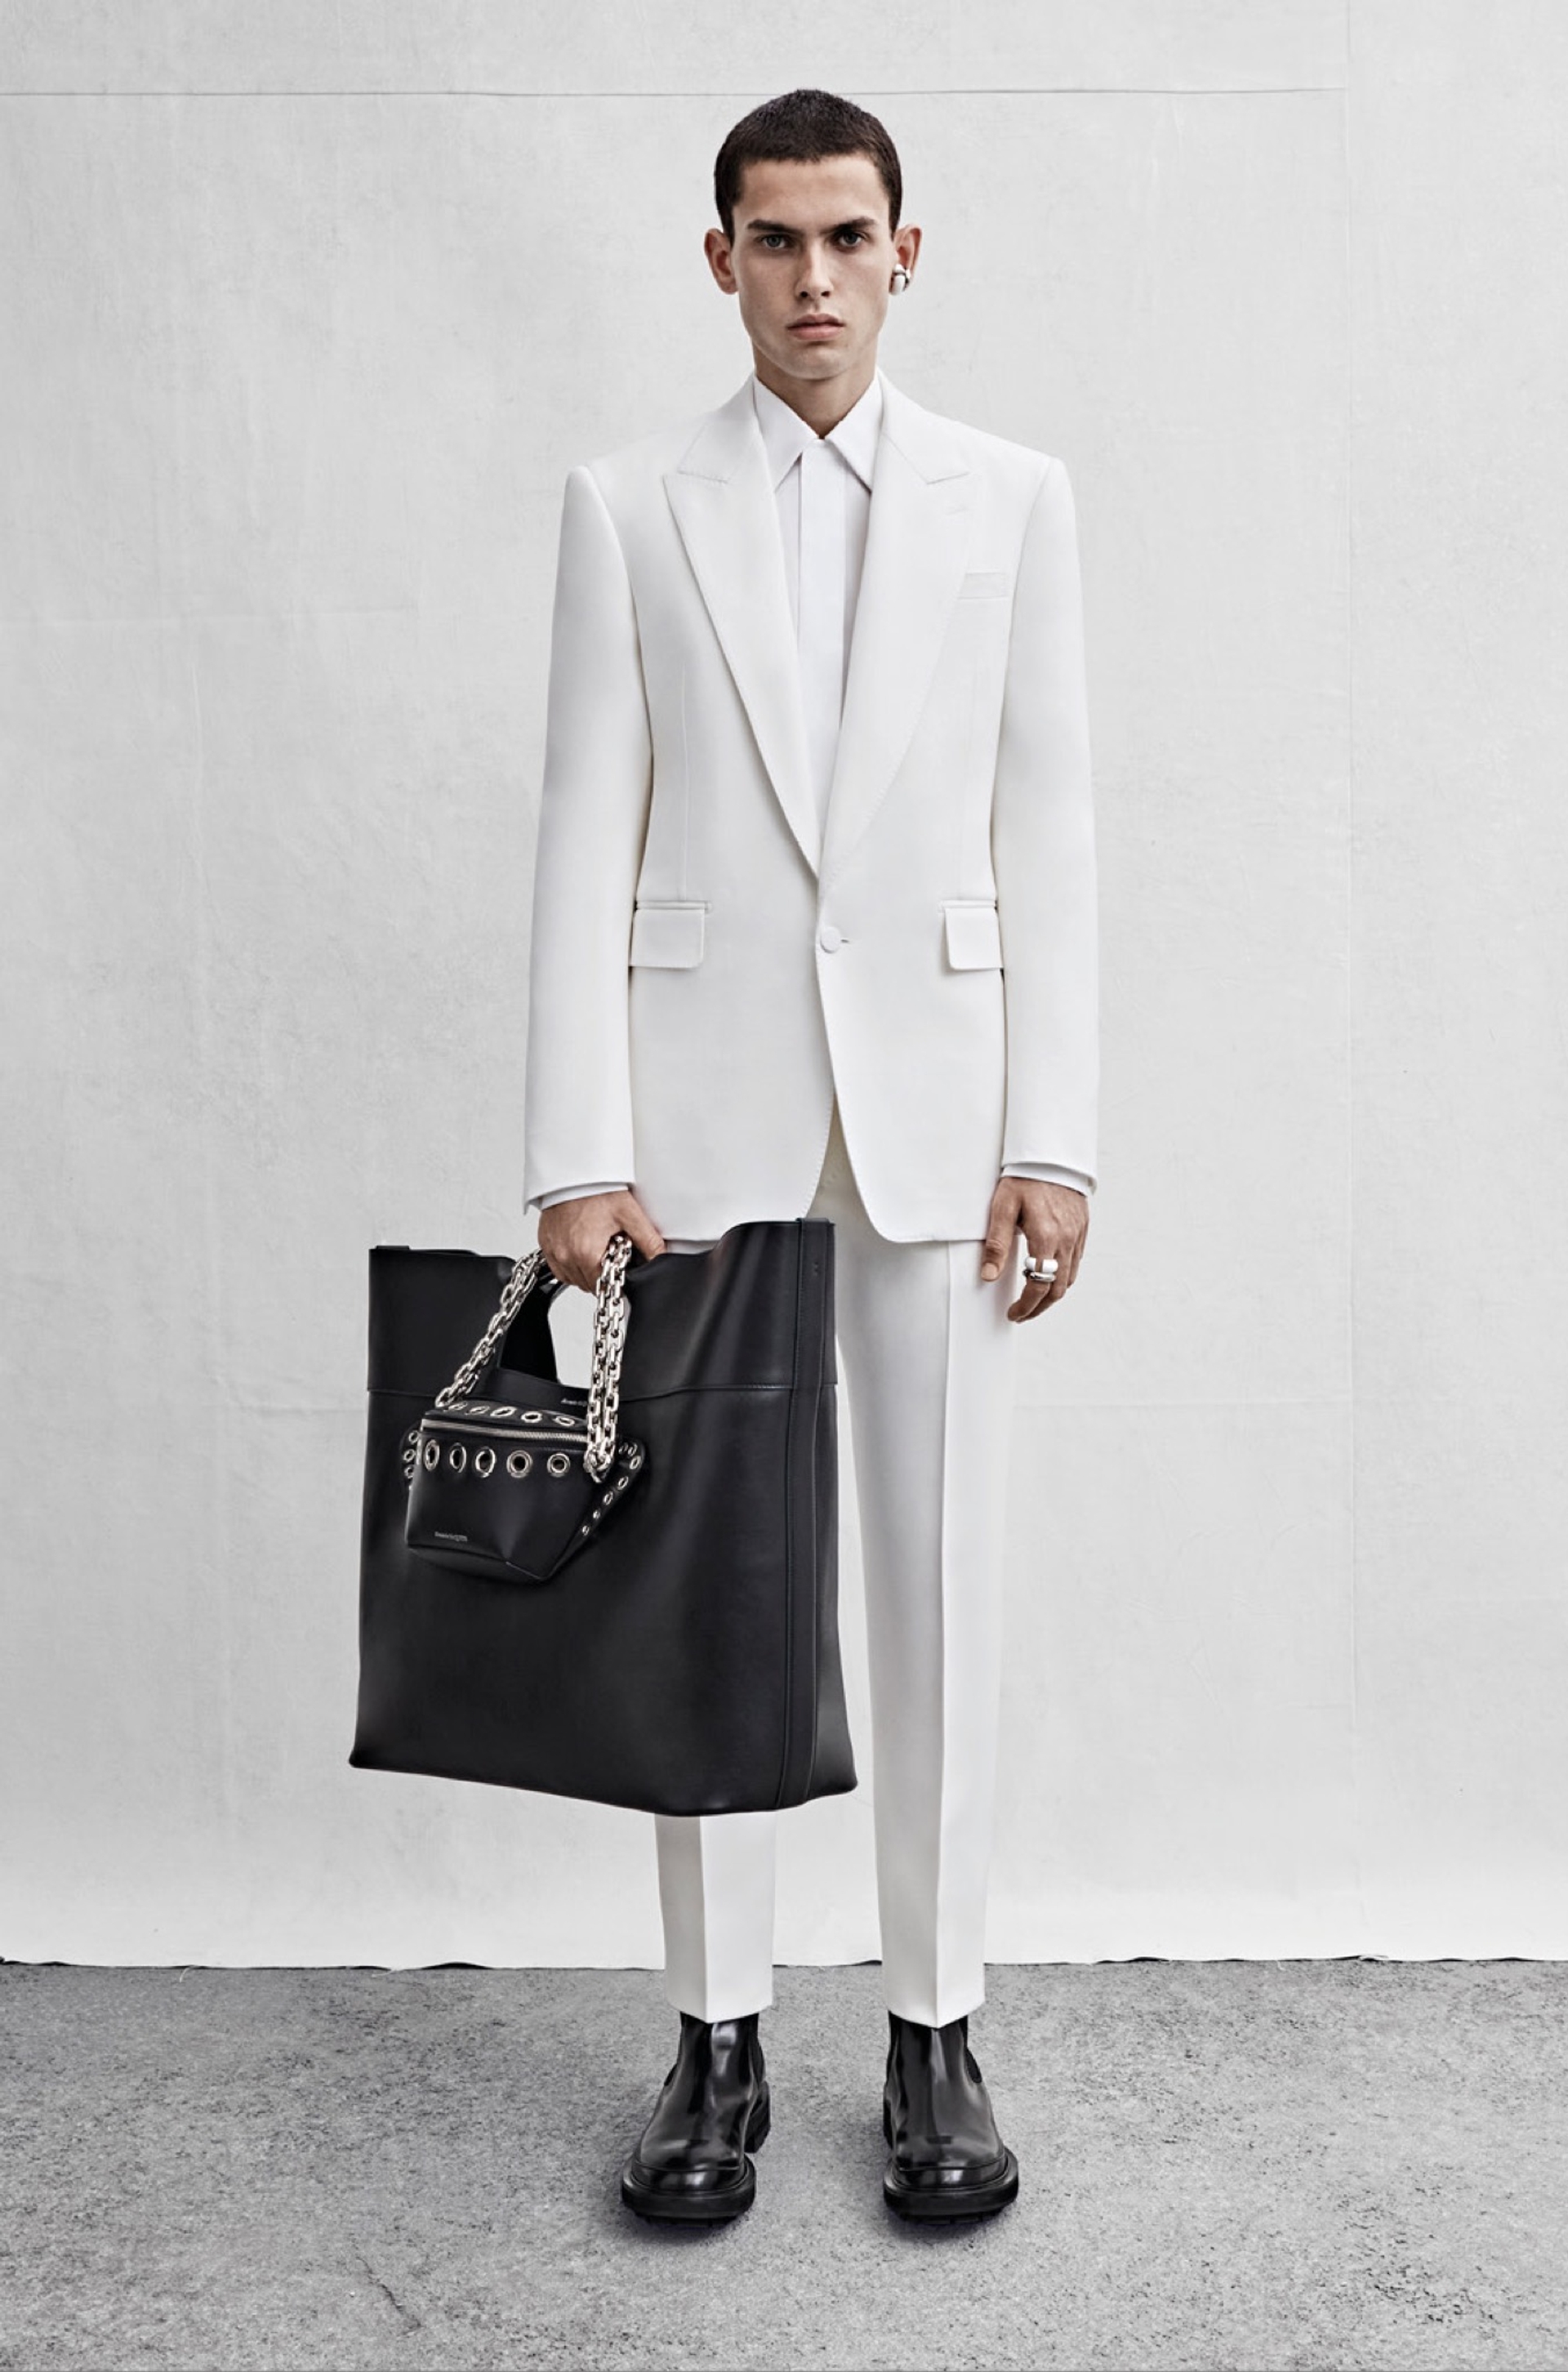 A single-breasted tailored jacket in ivory grain de poudre, a shirt in white cotton poplin and cigarette trousers in ivory grain de poudre.